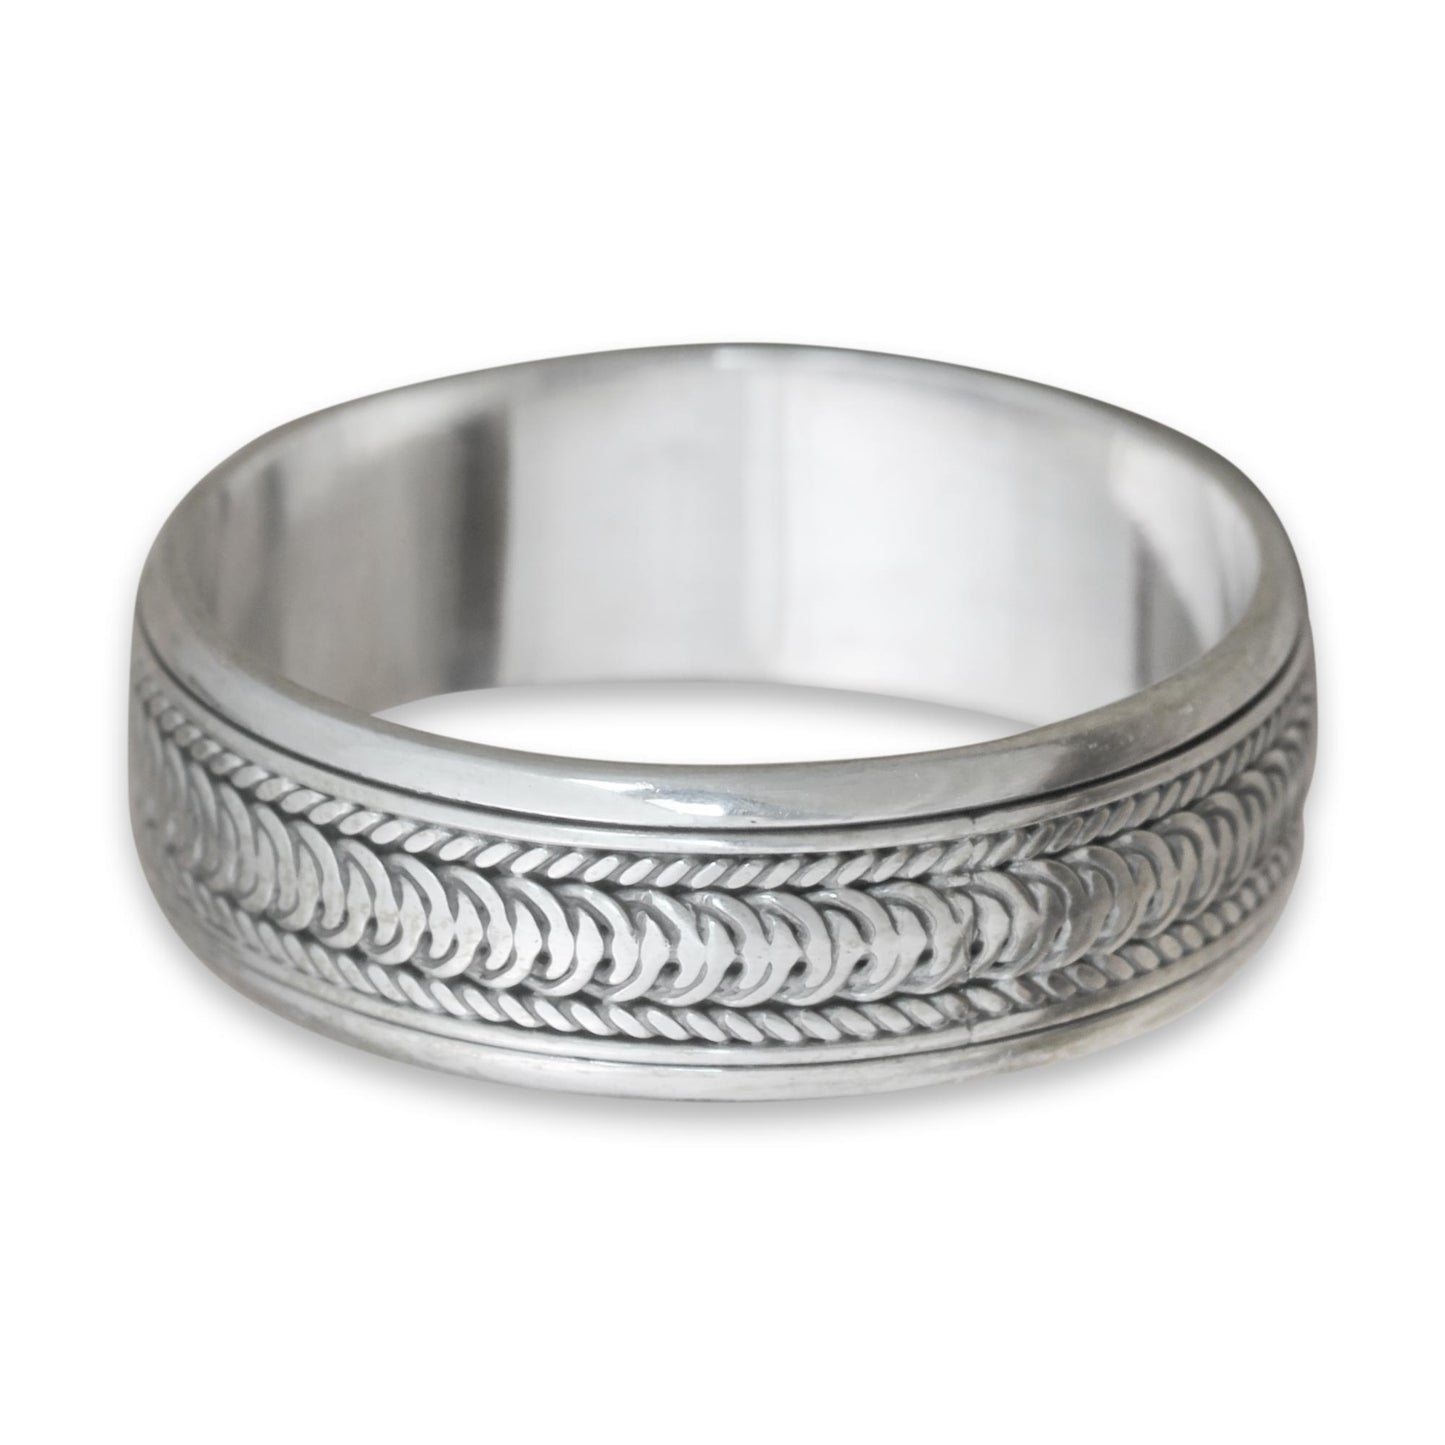 Infinity Path Spinner Band Ring